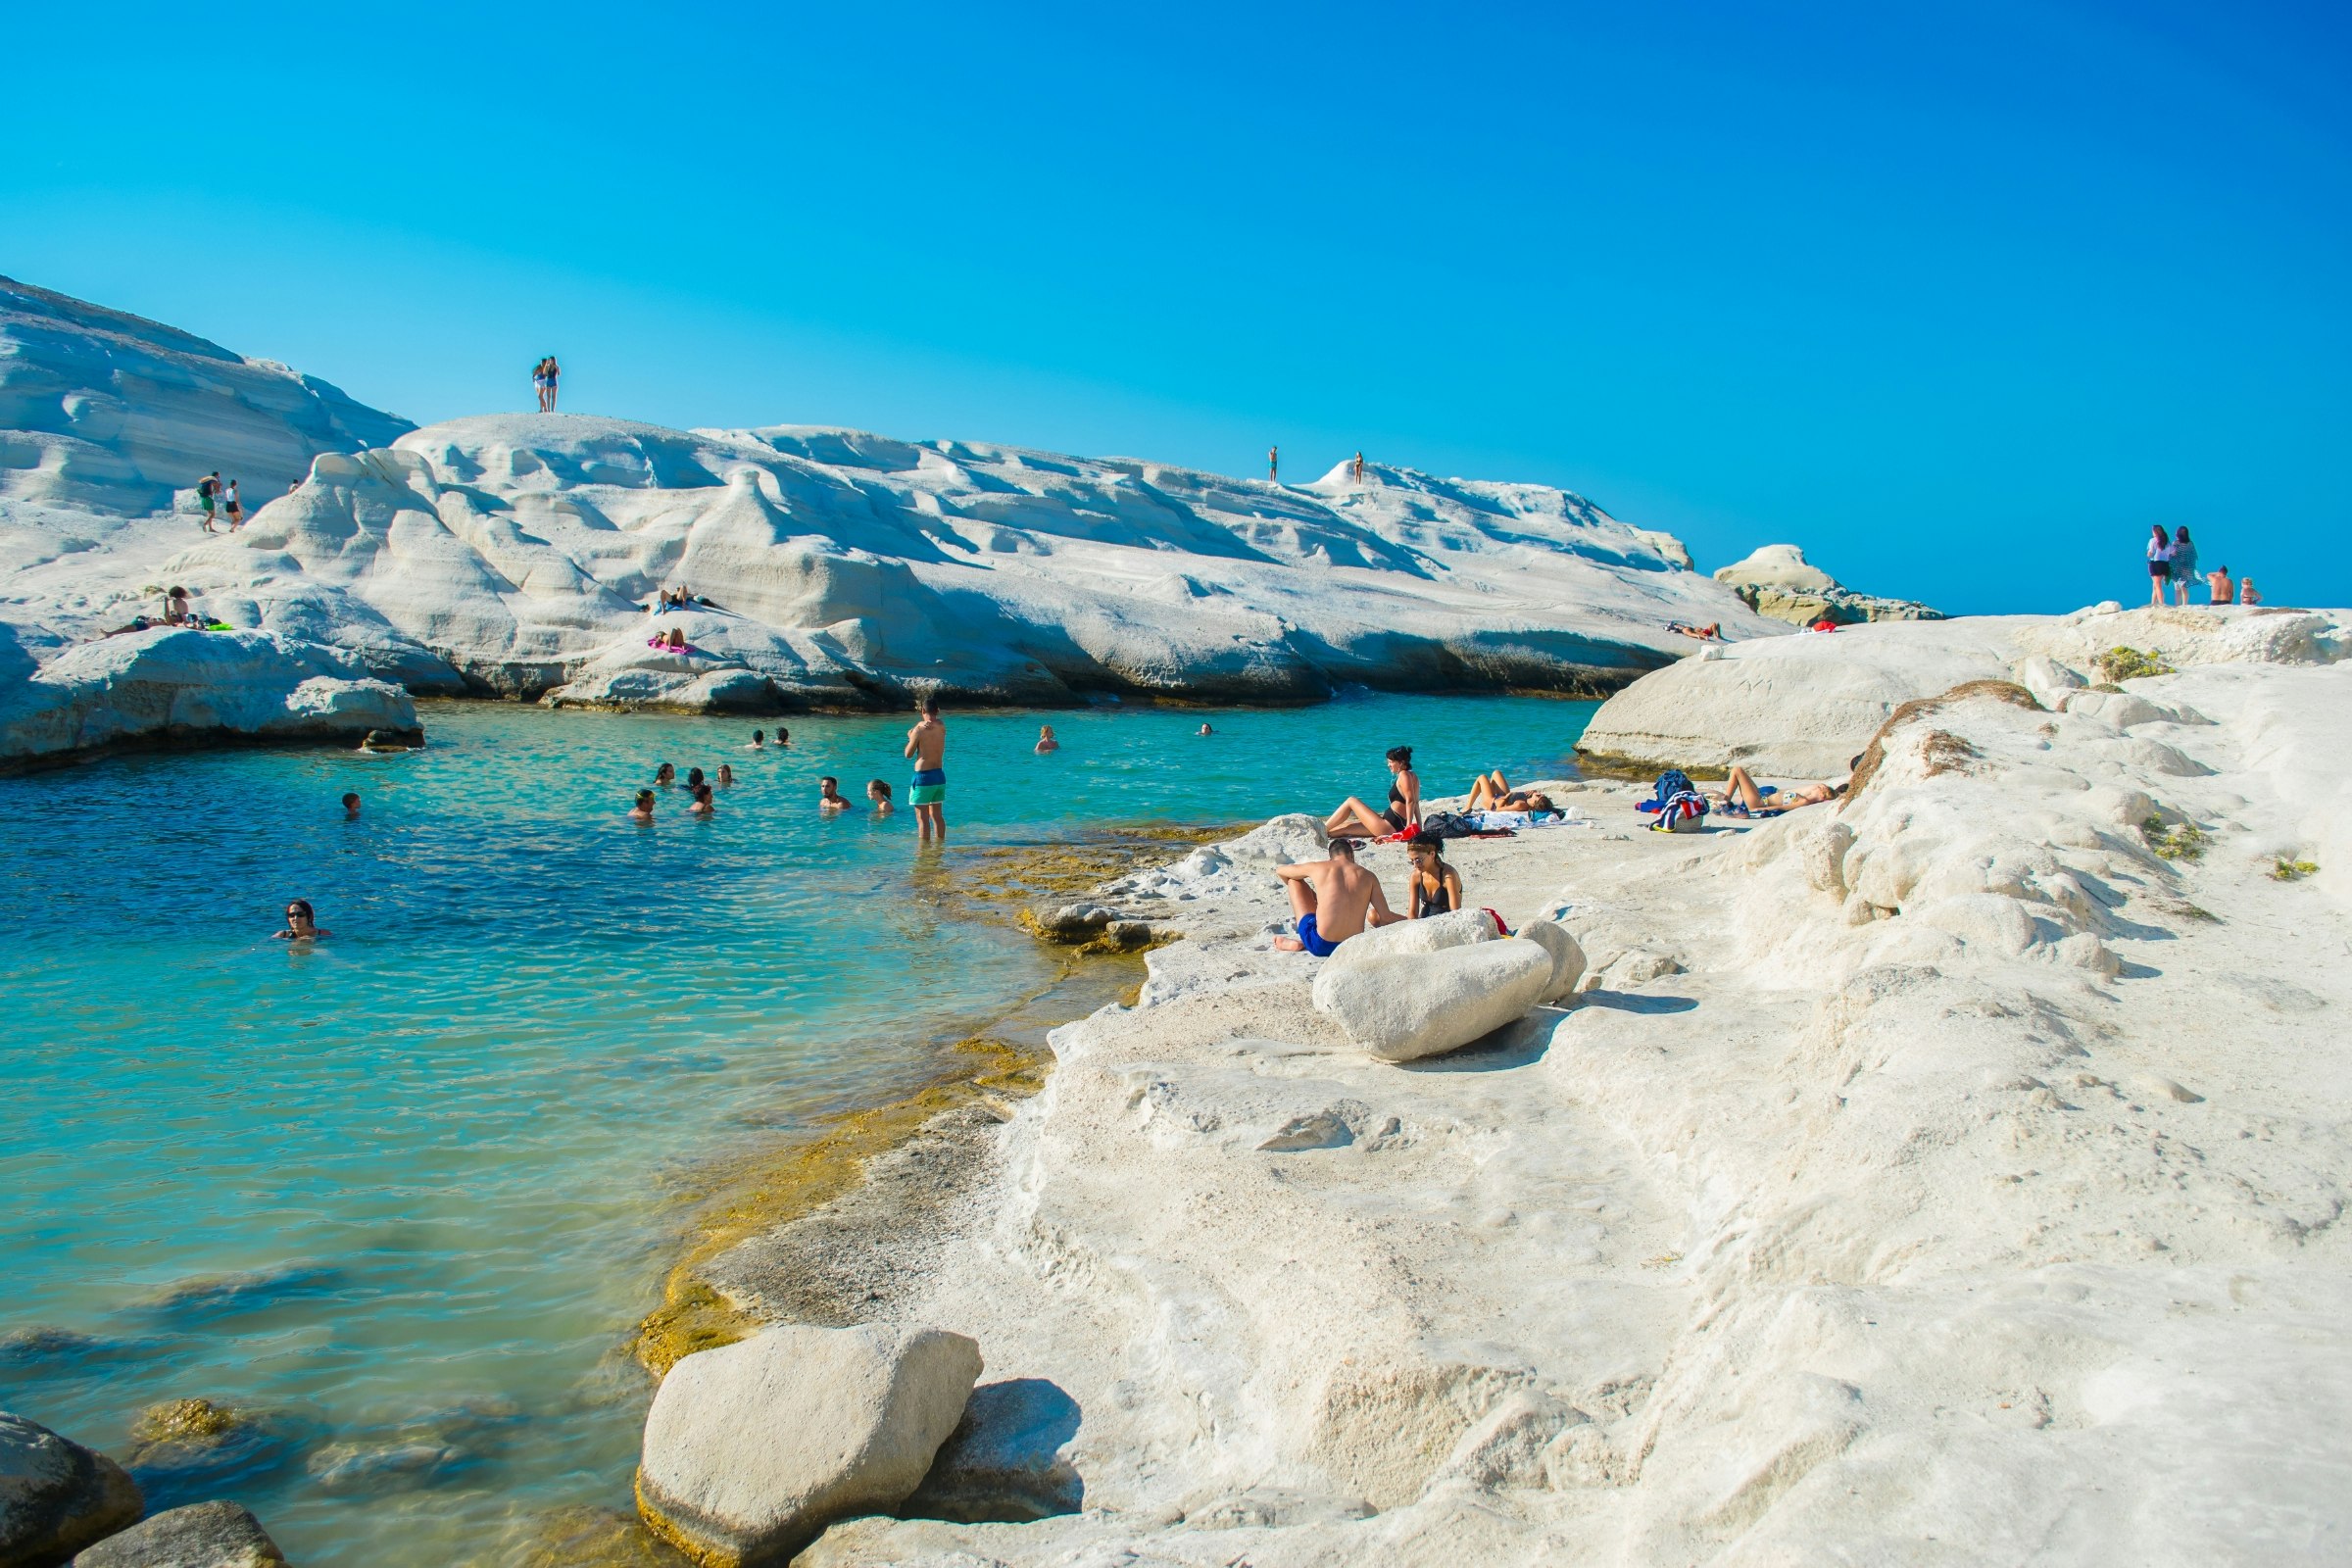 People sunbathing and playing on the white volcanic rocks that form the beach in Milos. The channel through the middle is turquoise and has about ten swimmers in it